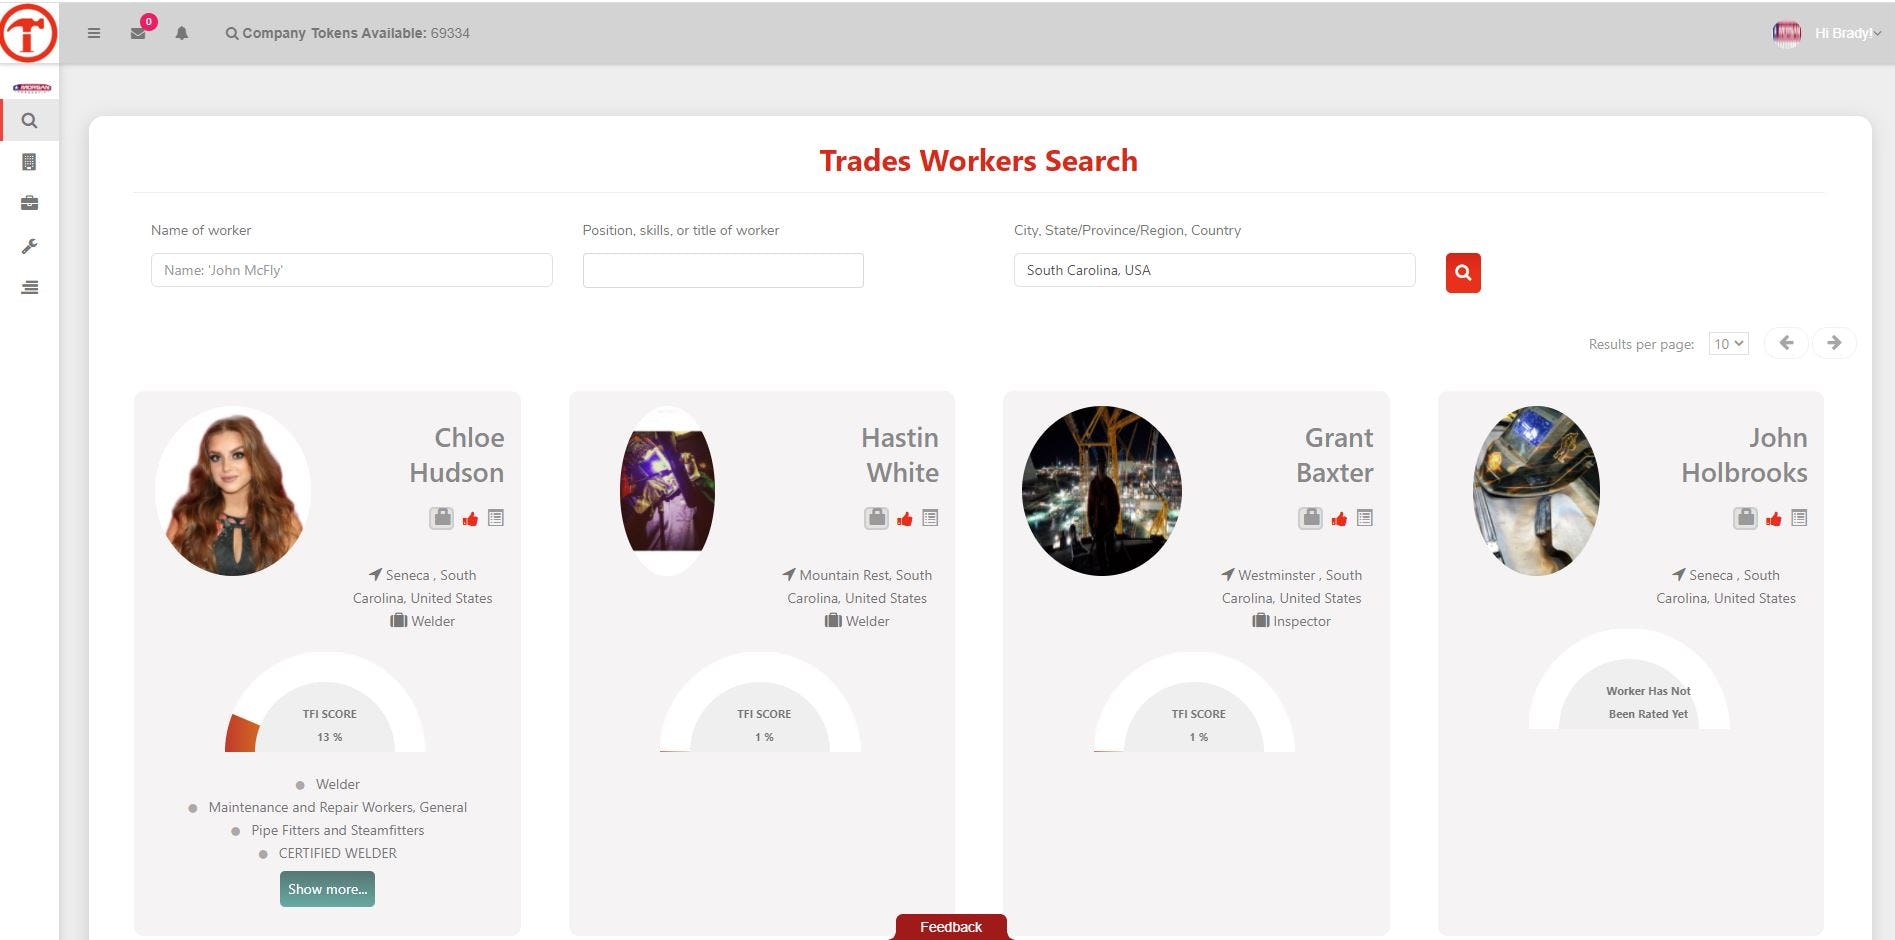 TradesFactor Software - Search for skilled workers in our database of tens of thousands.